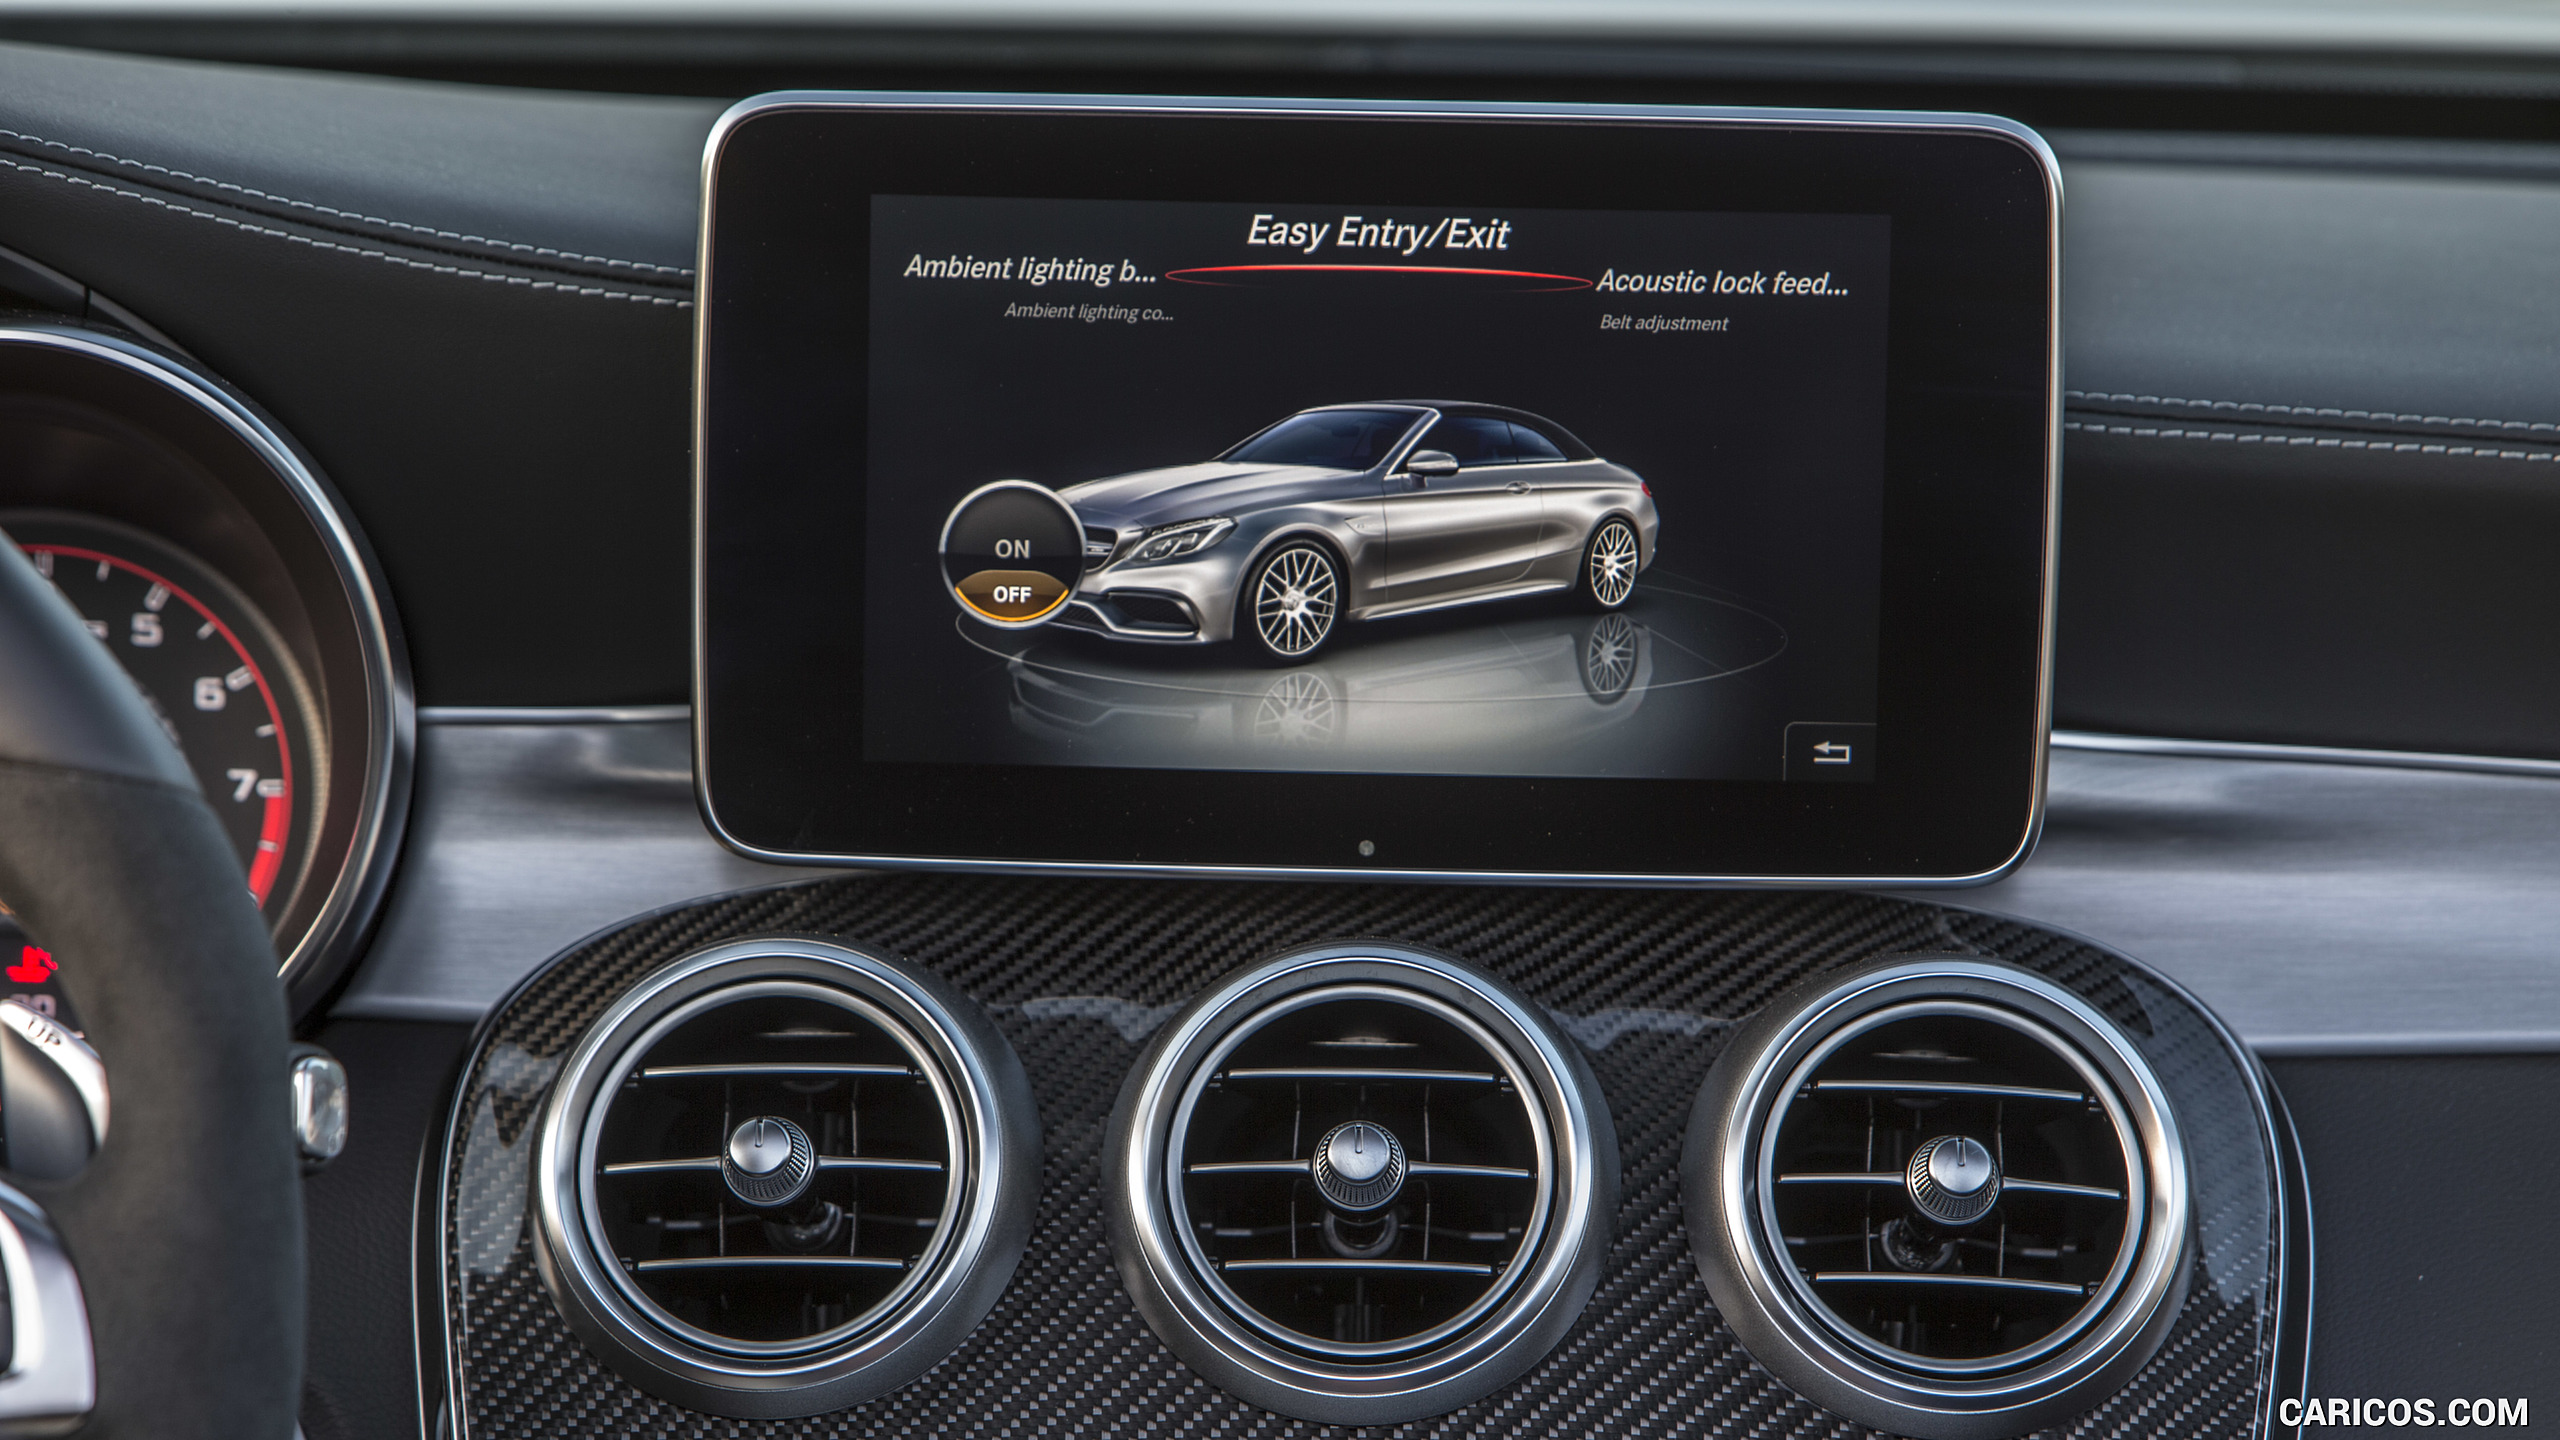 2017 Mercedes-AMG C63 S Cabriolet - Infotainment Screen - Central Console, #155 of 222